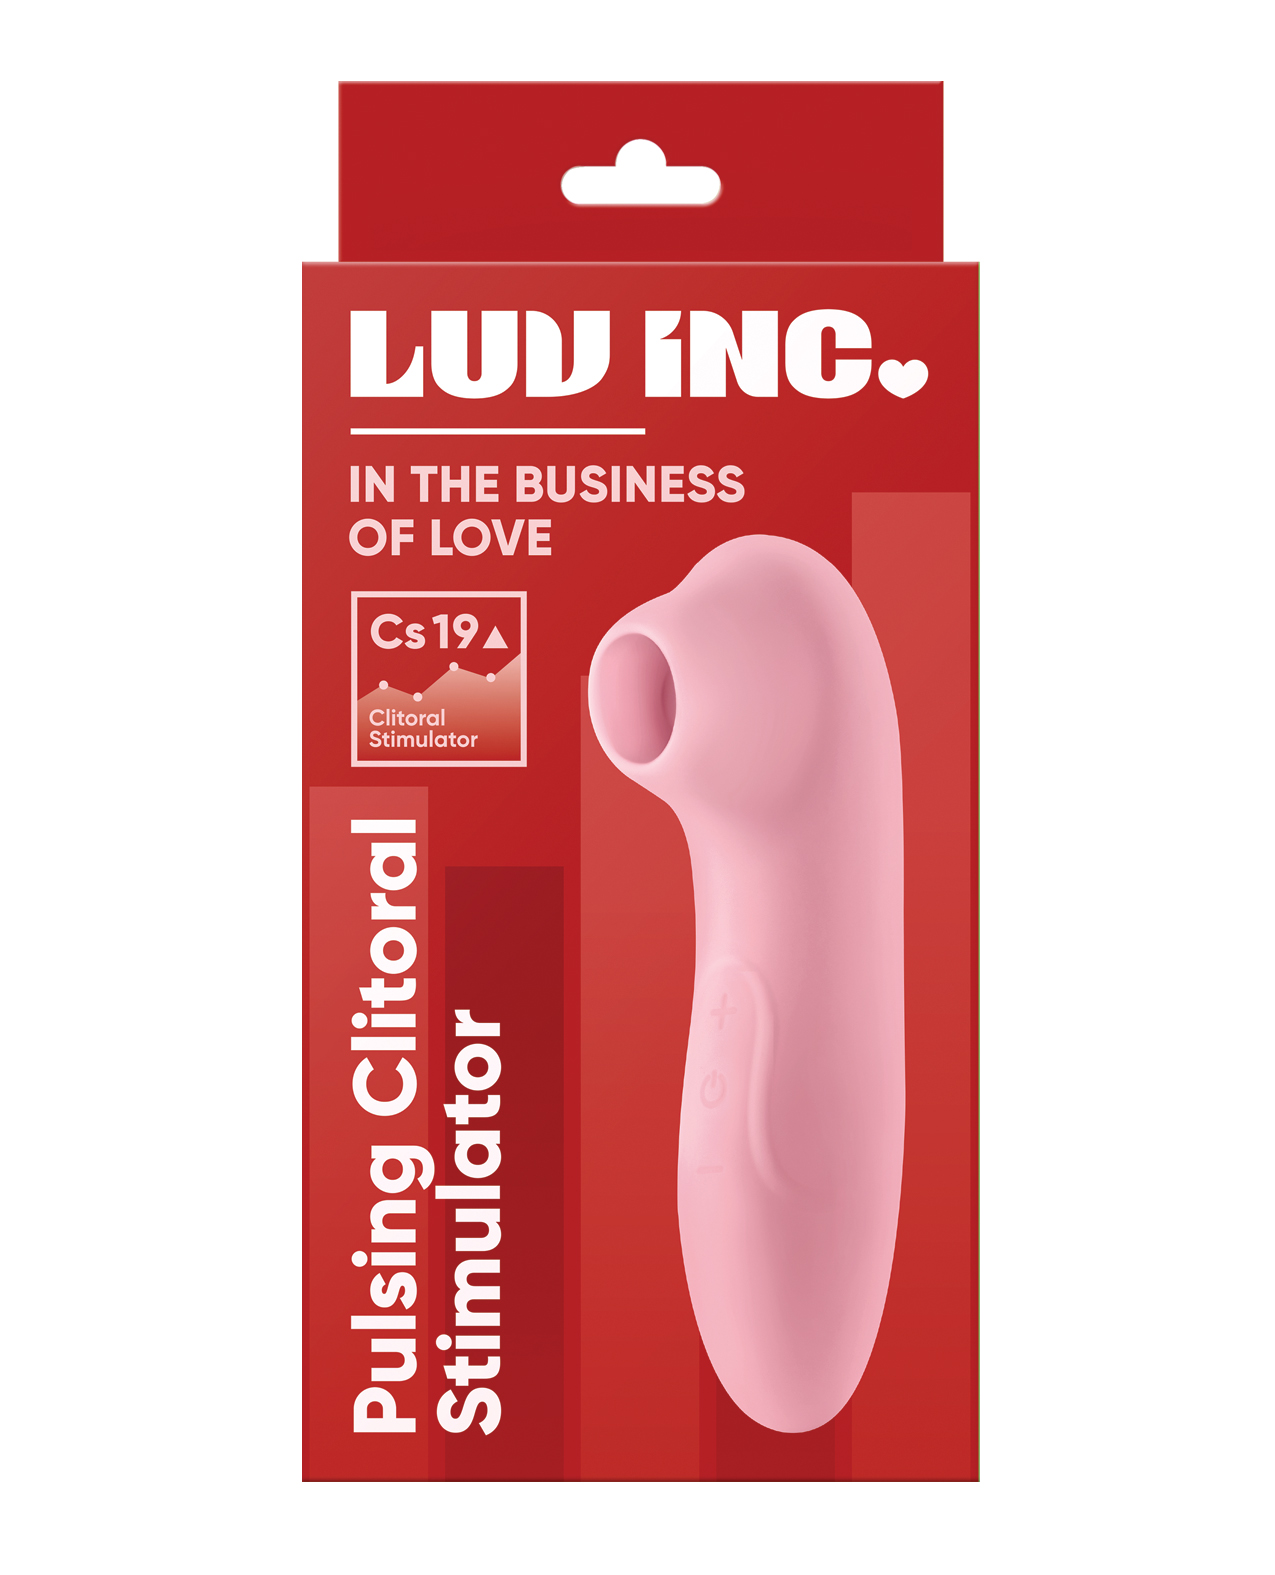 pulsing clit toy in pink on a red box